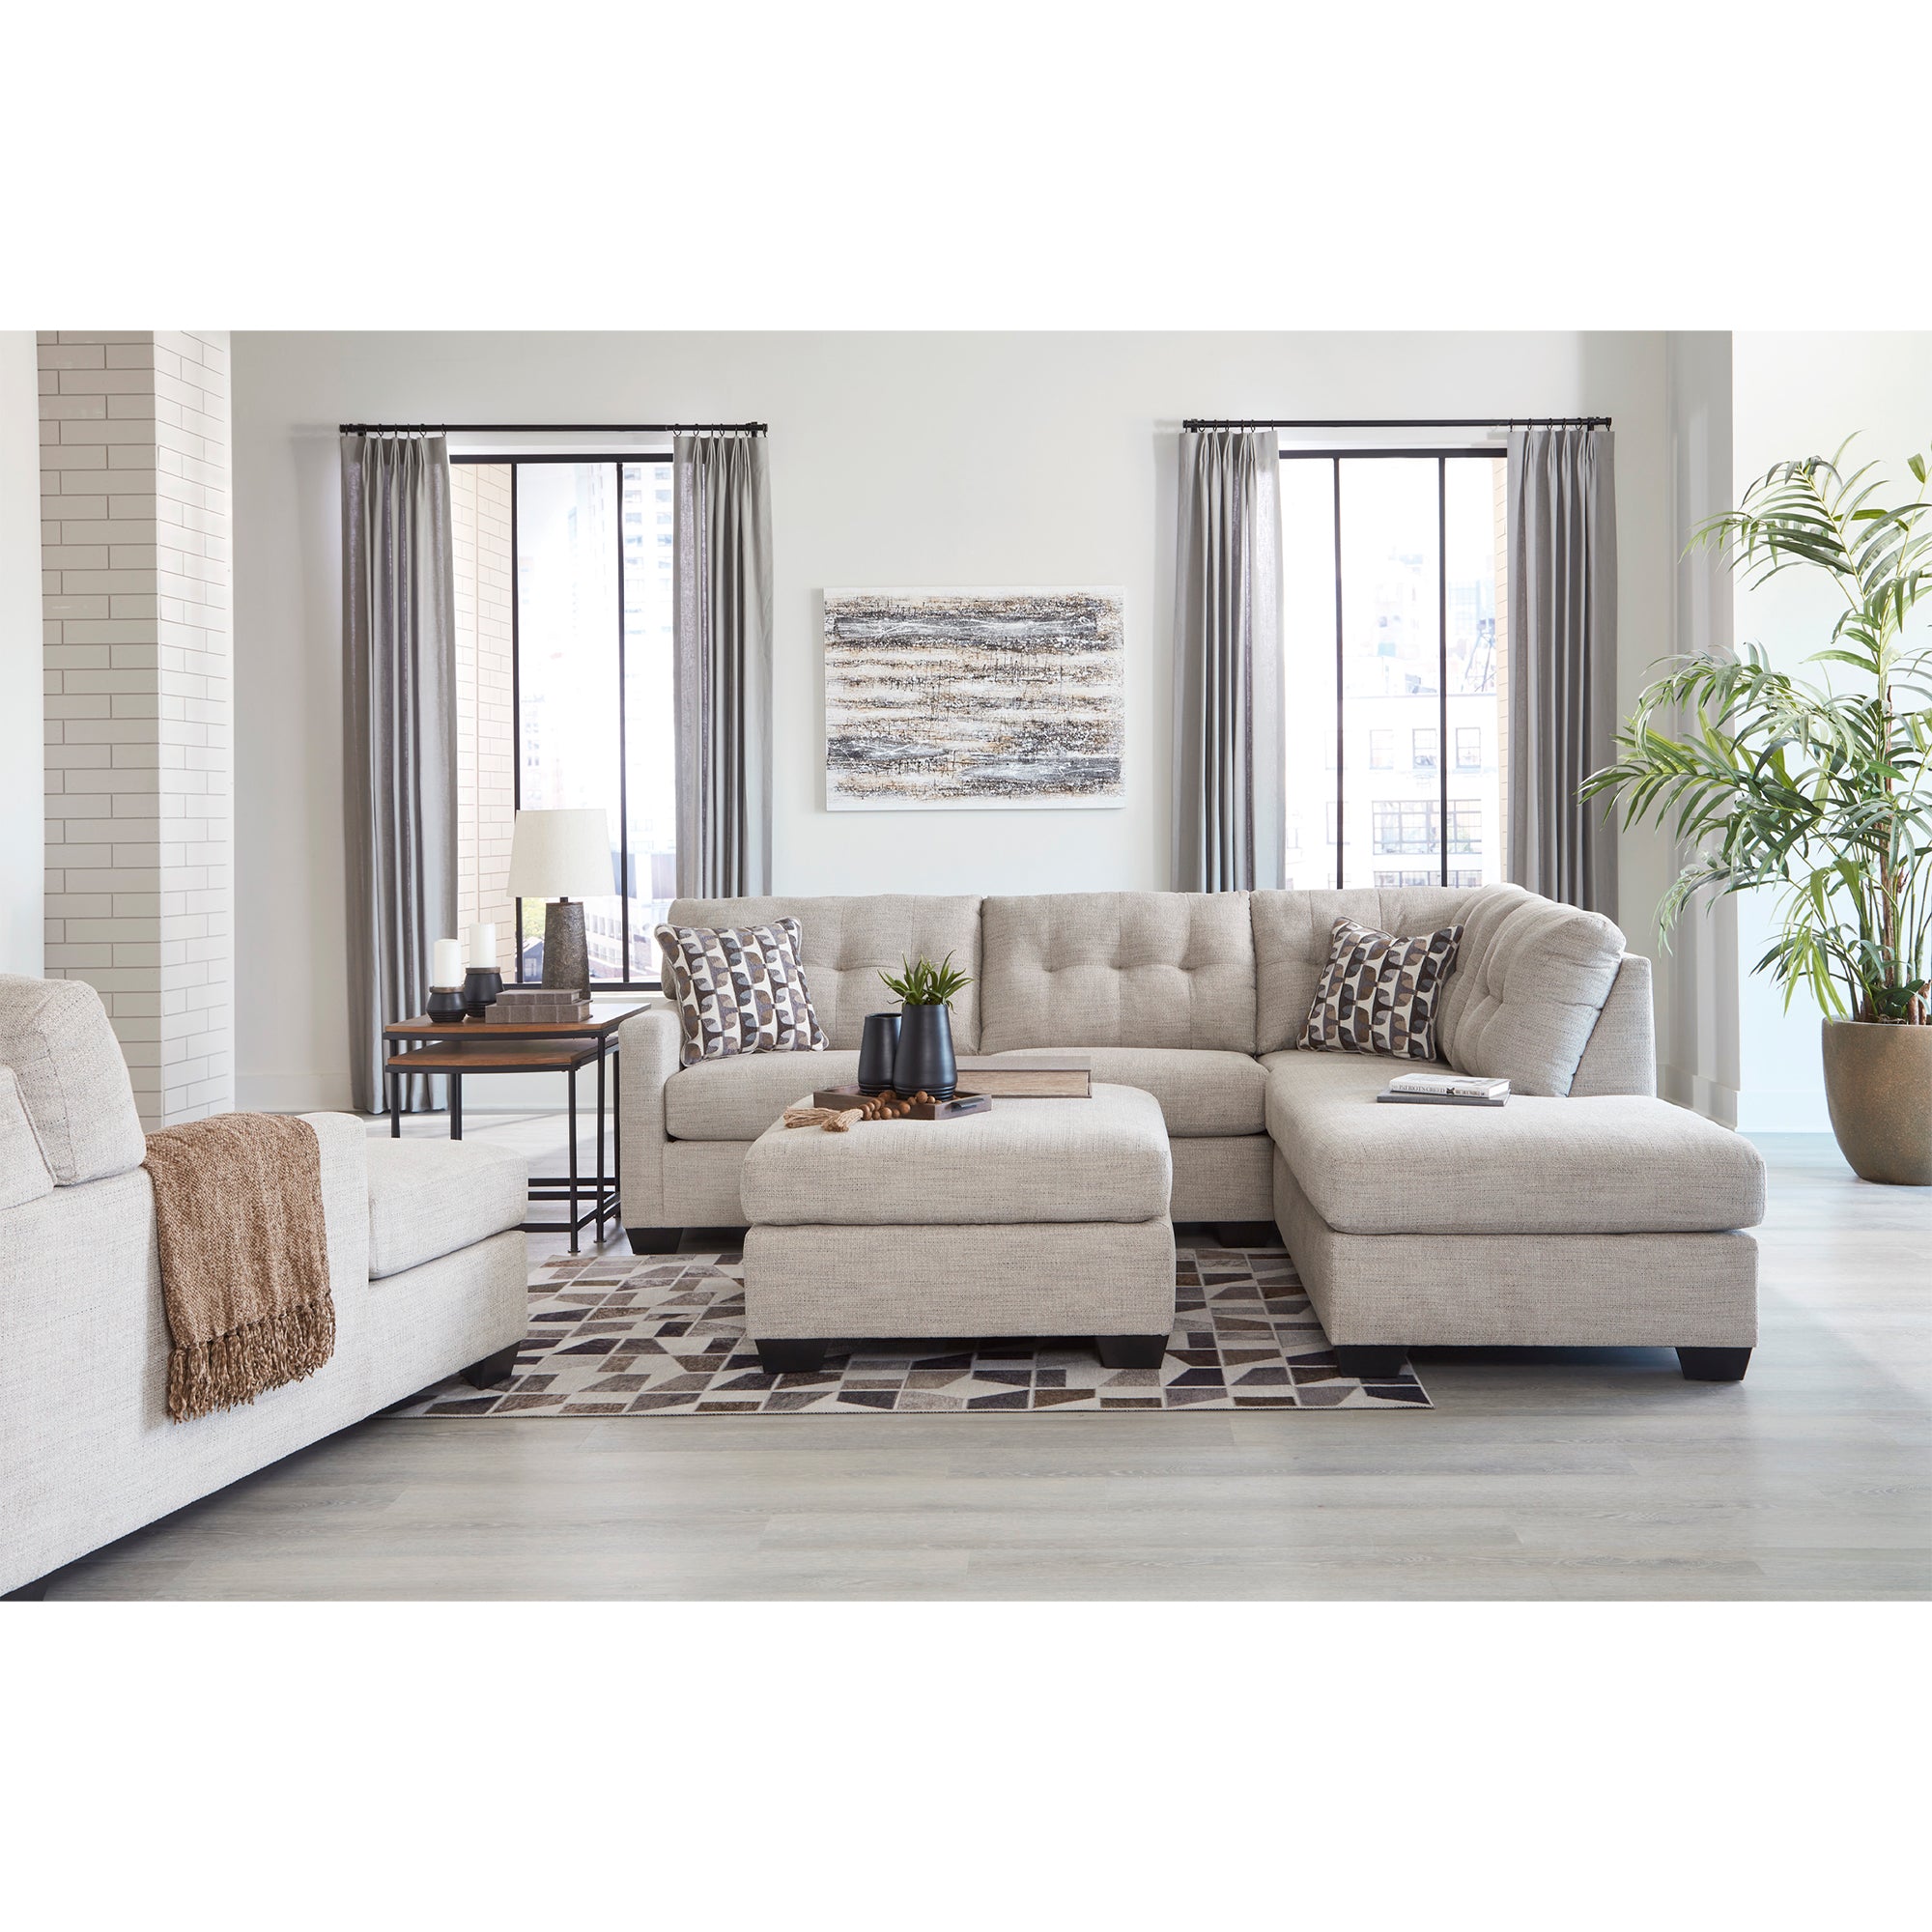 Mahoney 2-Piece Sectional with Chaise, featuring durable pebble upholstery, suitable for Milwaukee family rooms